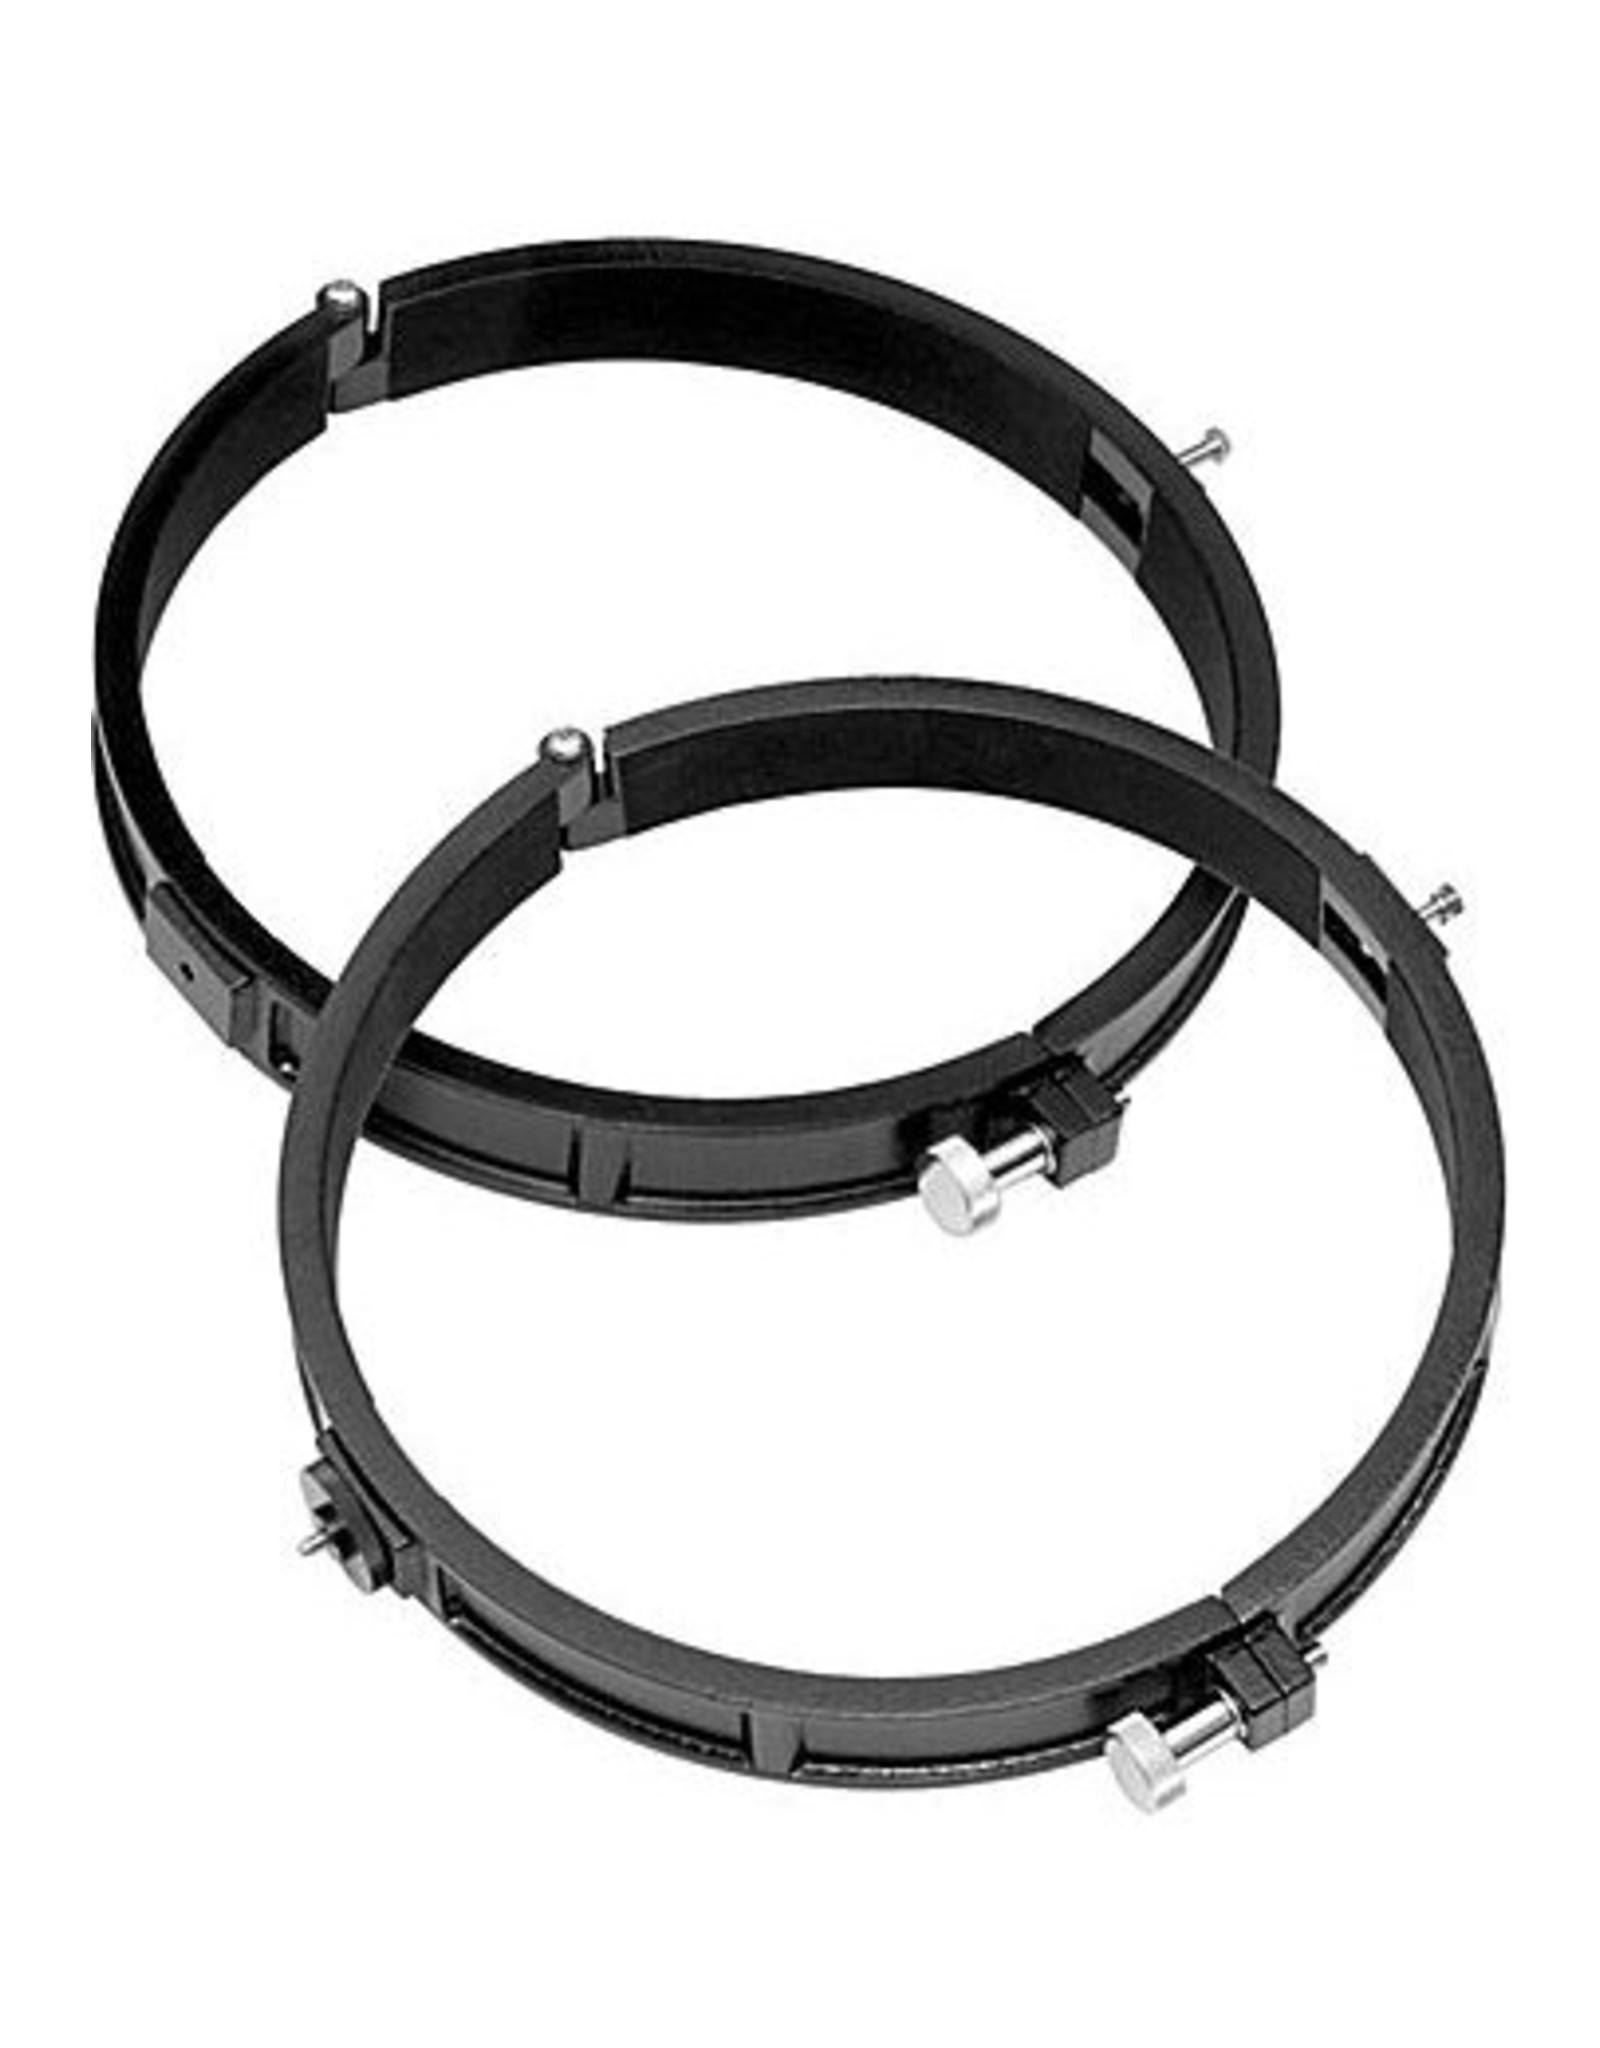 Orion Orion 182mm ID Telescope Tube Mounting Rings - Camera Concepts Telescope Tube Mounting Rings